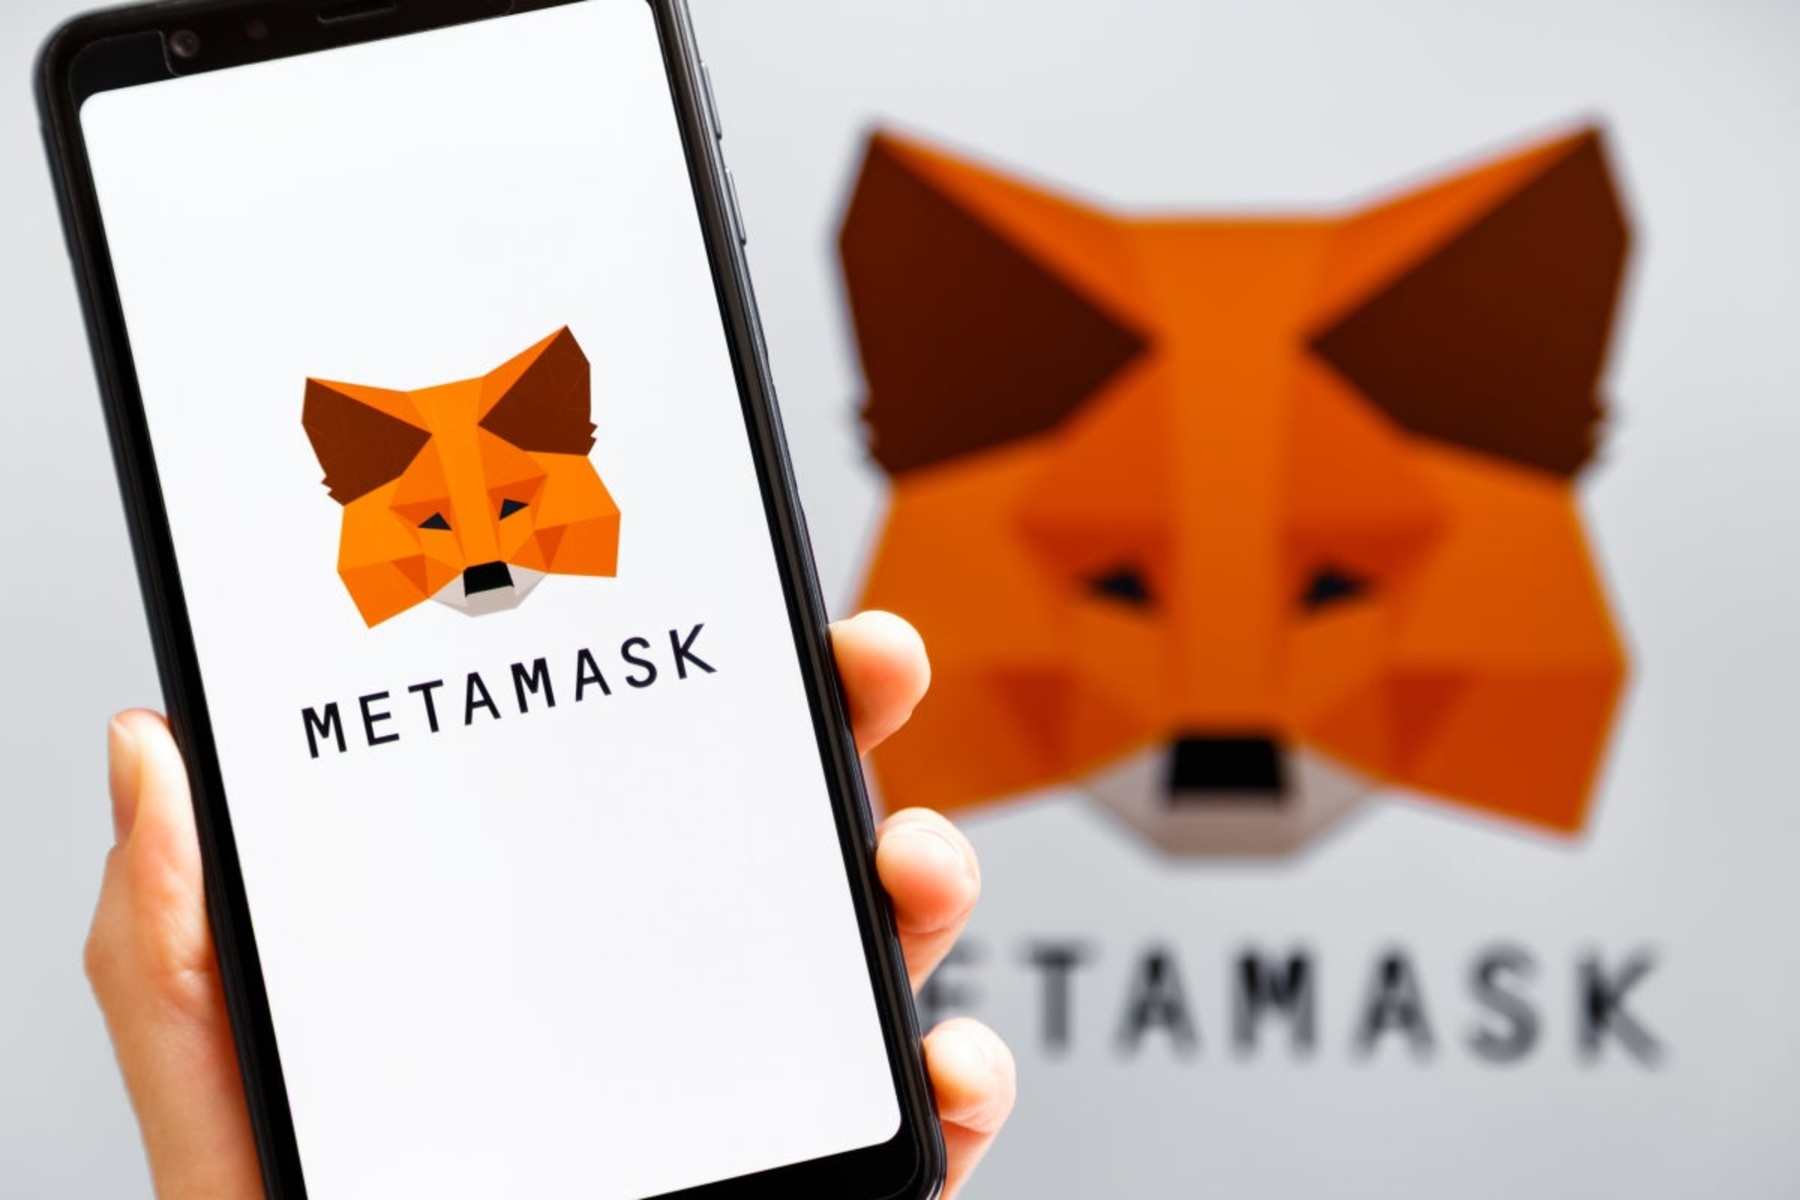 How To Send NFT From Metamask